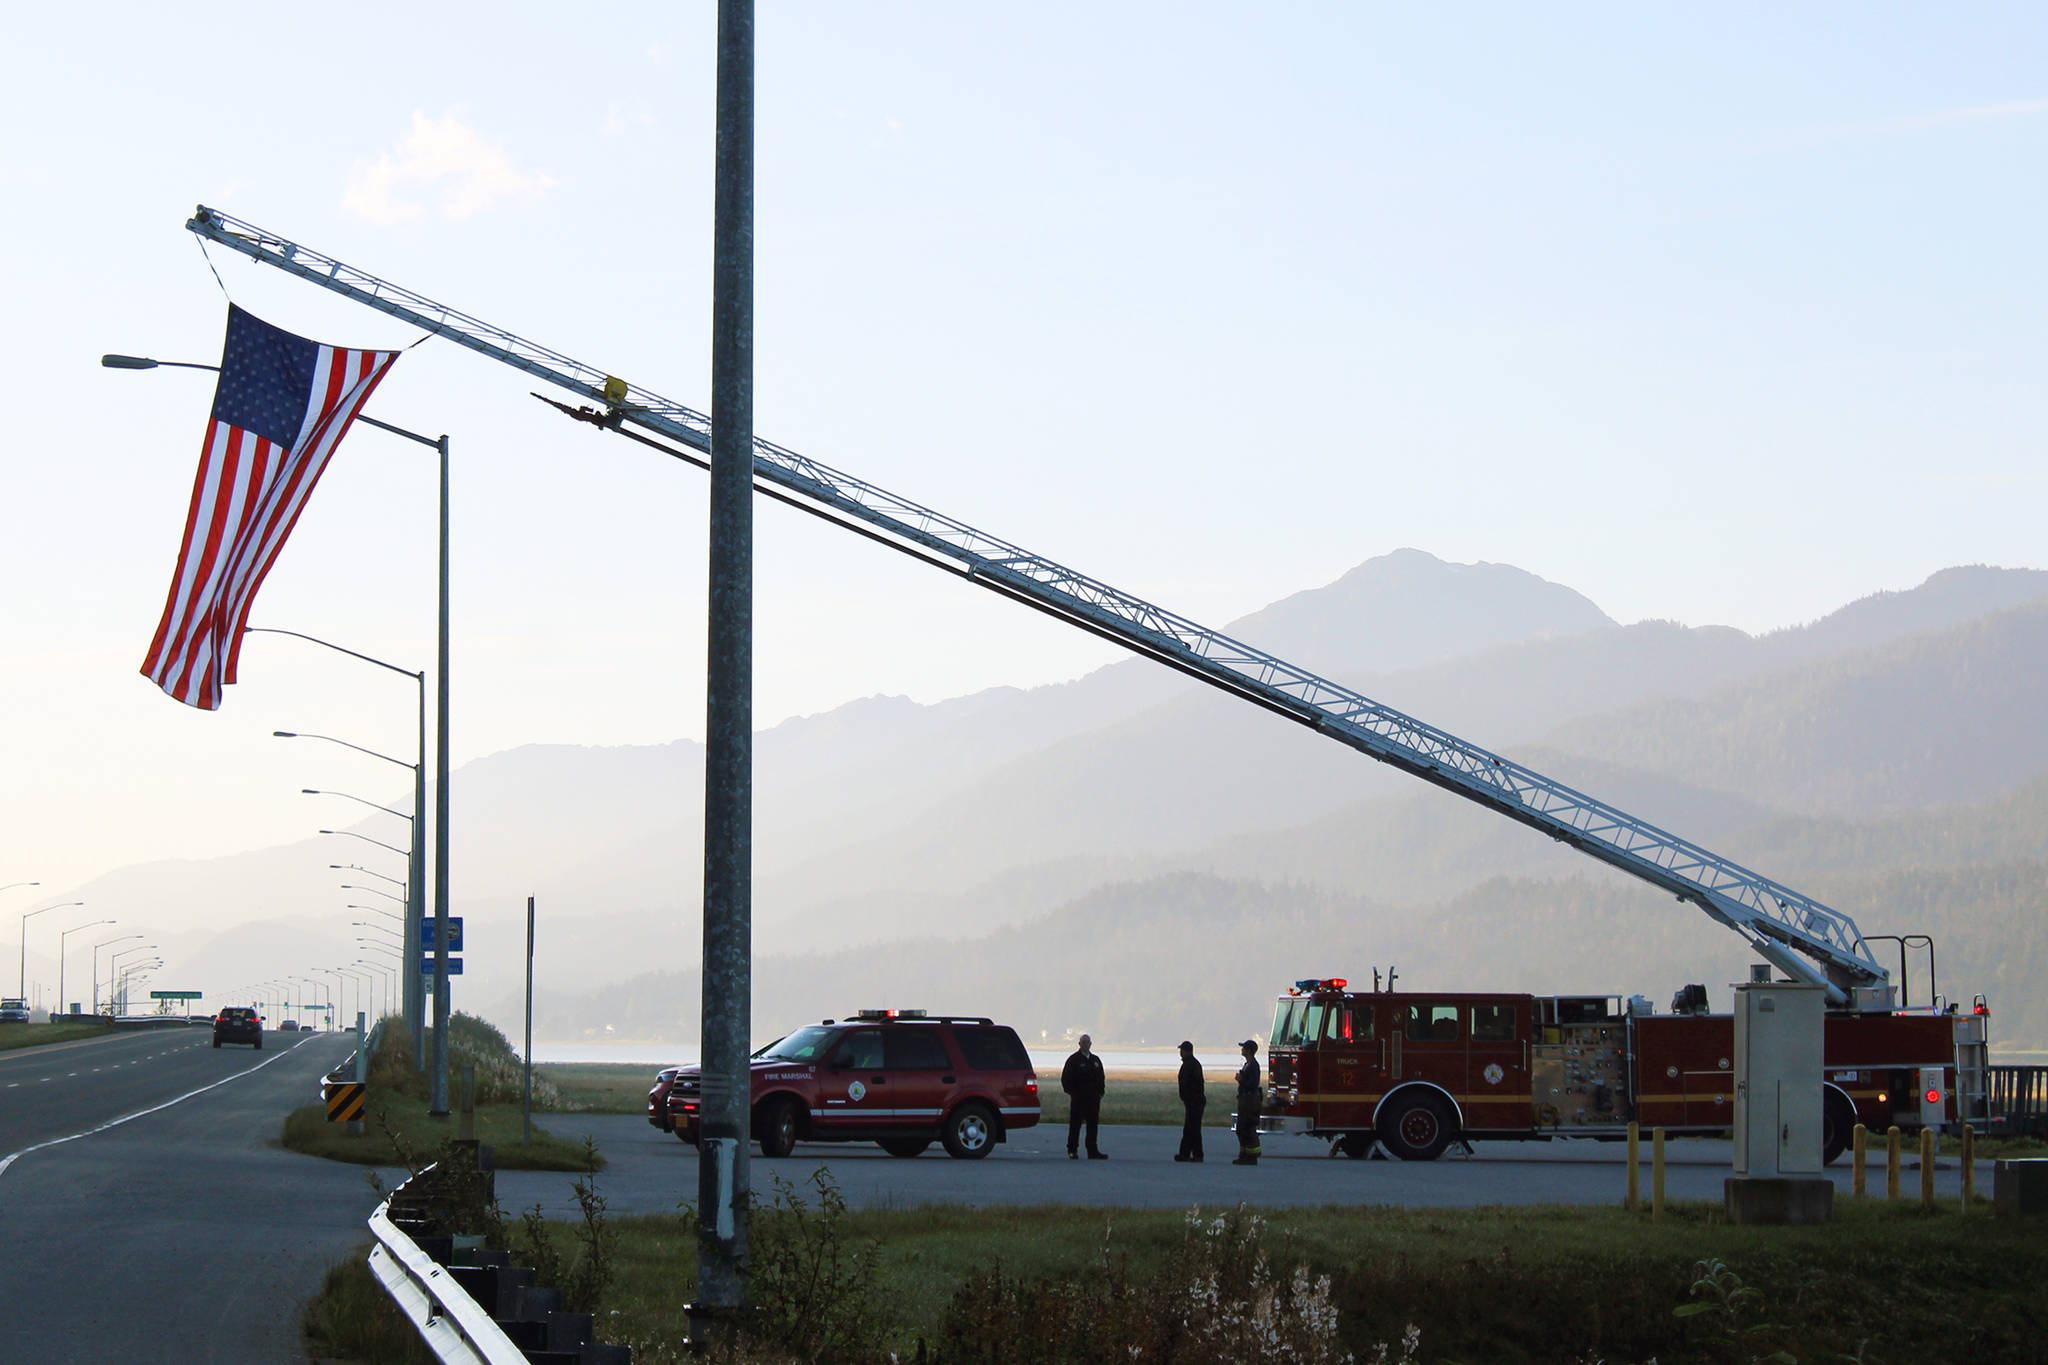 Capital City Fire/Rescue flies an American flag near the Mendenhall Wetlands State Game Refuge on the morning of Friday, Sept. 11, 2020. Friday was the 19th anniversary of the 9/11 terror attacks. (Ben Hohenstatt / Juneau Empire)